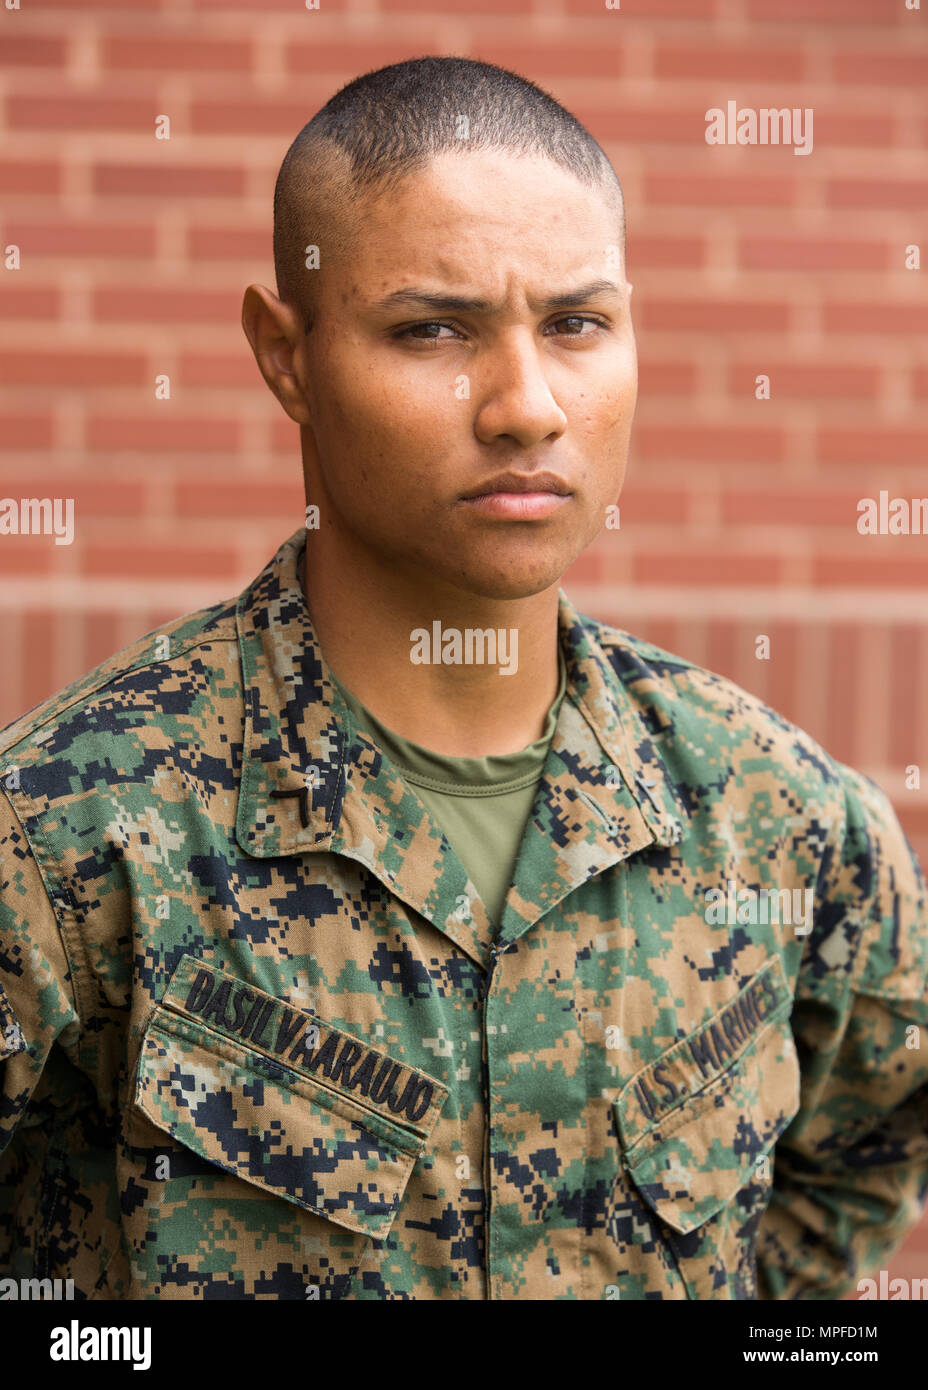 Pfc. Lucas F. Dasilva Araujo, Platoon 3013, Lima Company, 3rd Recruit Training Battalion, earned U.S. citizenship Feb. 23, 2017, on Parris Island, S.C. Before earning citizenship, applicants must demonstrate knowledge of the English language and American government, show good moral character and take the Oath of Allegiance to the U.S. Constitution. Dasilva Araujo, from Queens, N.Y., originally from Brazil, is scheduled to graduate Feb. 24, 2017. (Photo by Lance Cpl. Maximiliano Bavastro) Stock Photo